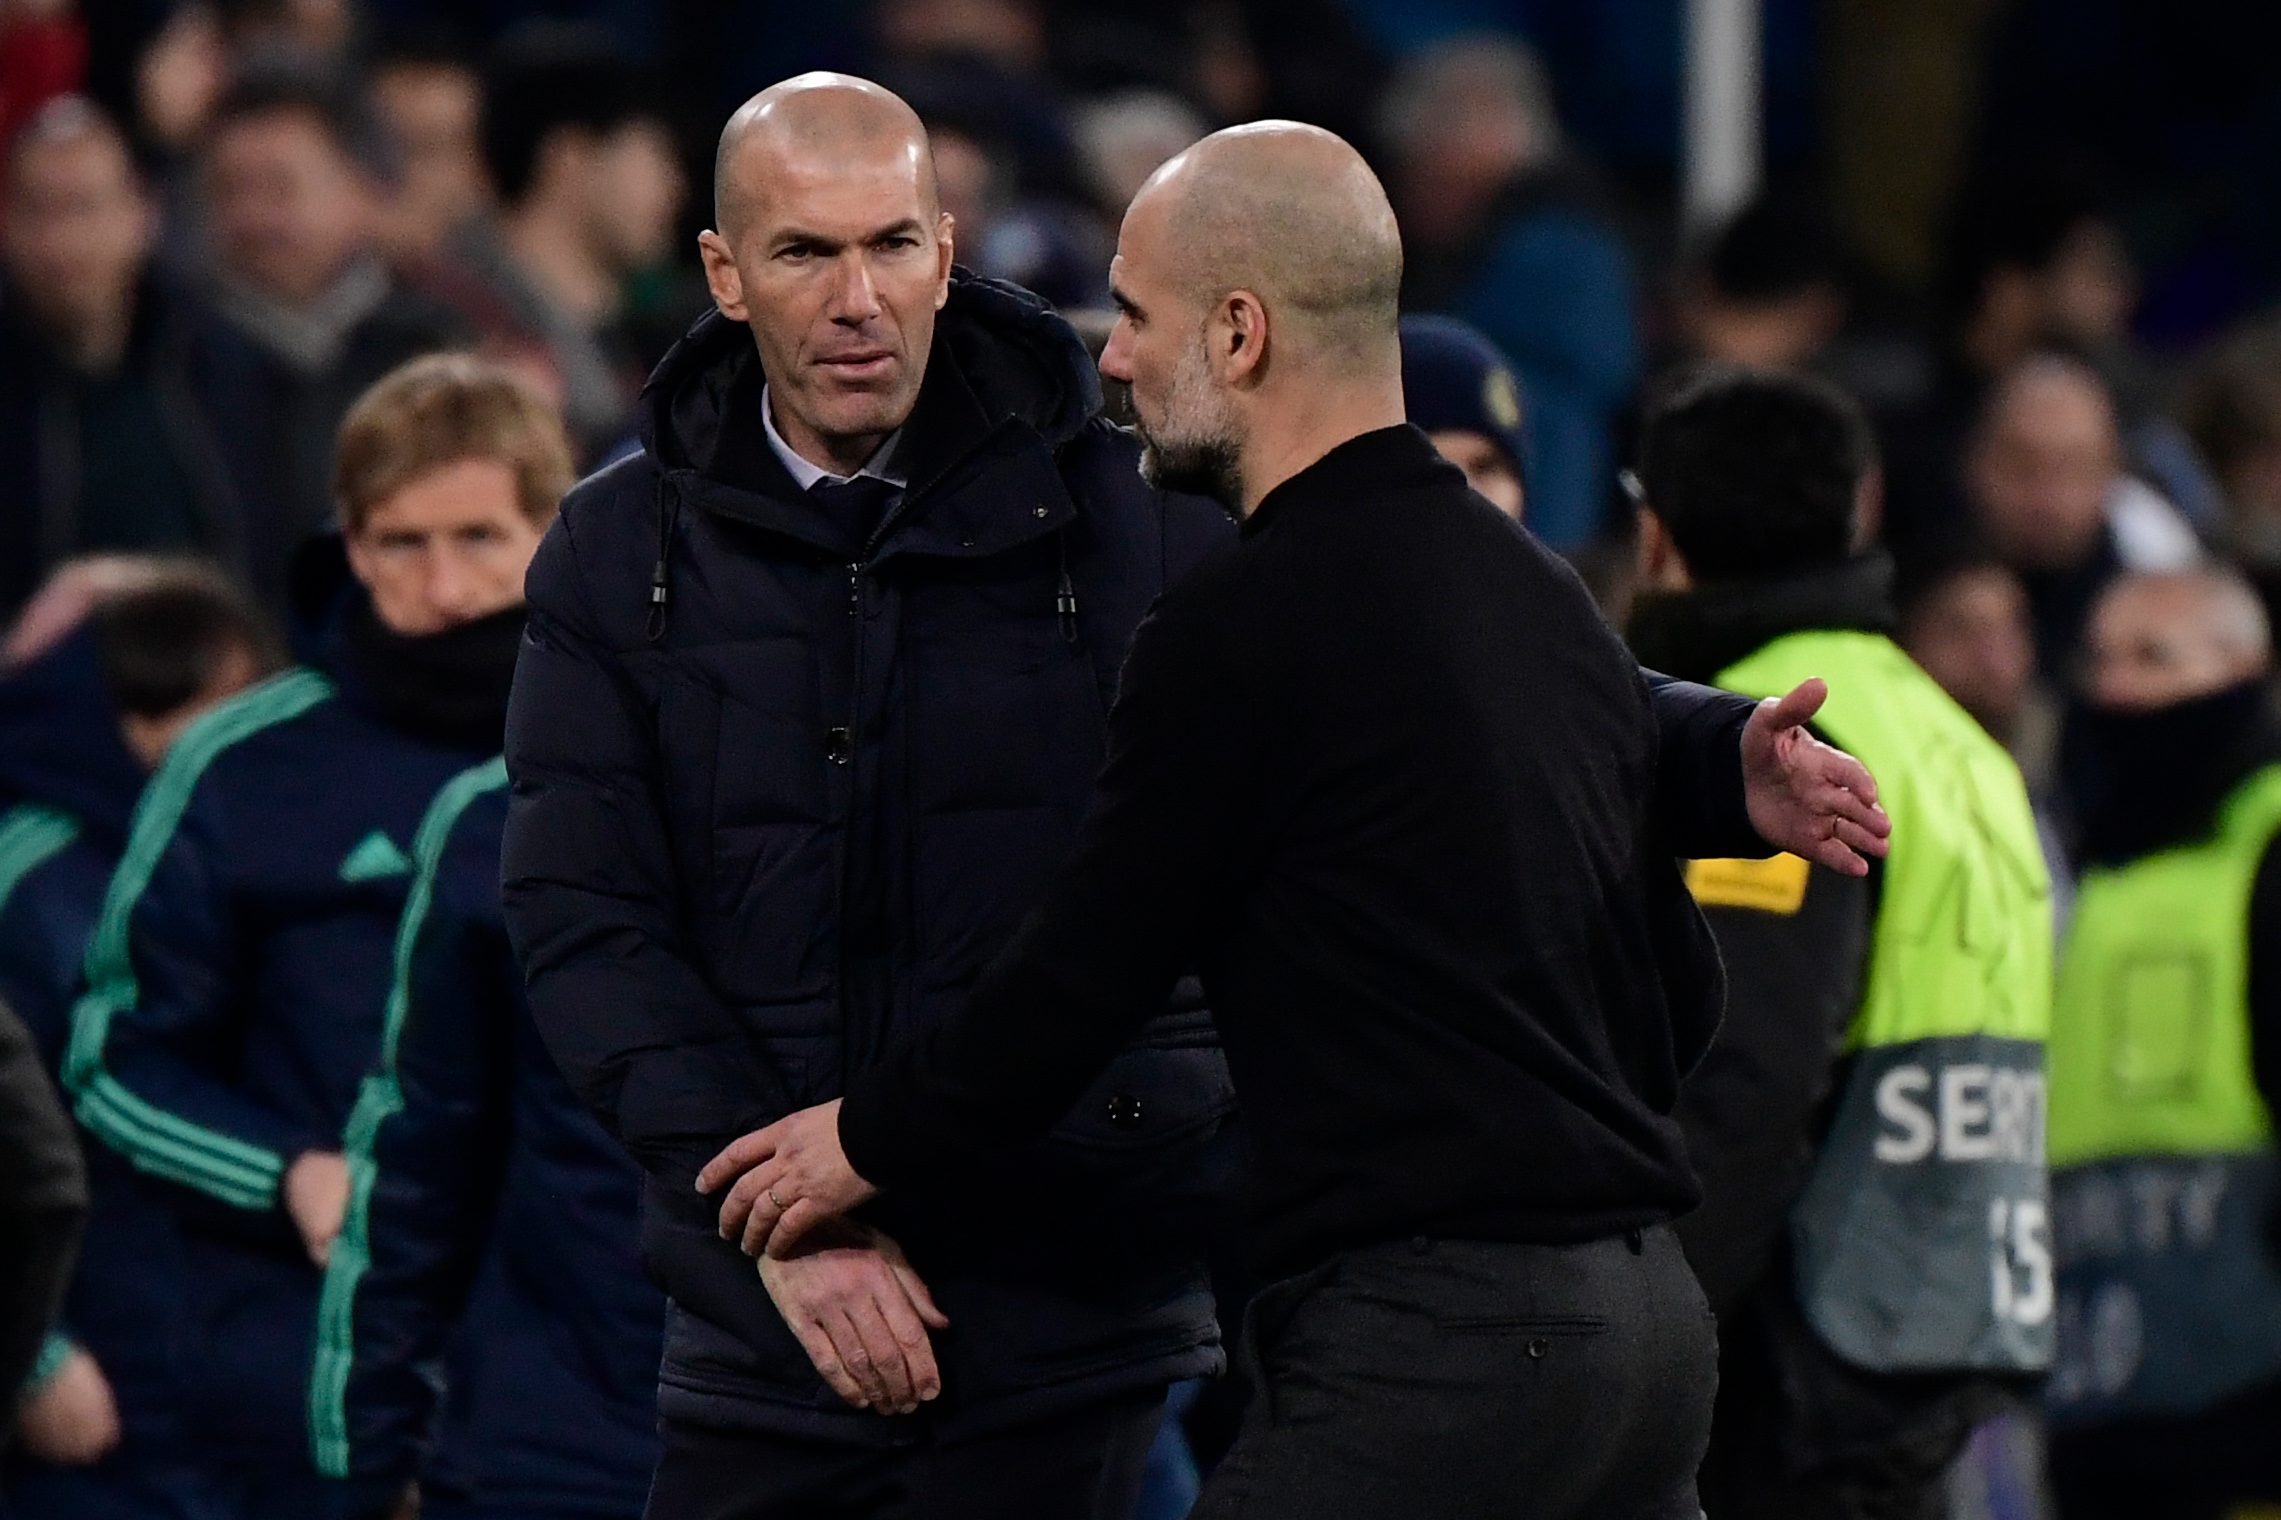 Real Madrid's French coach Zinedine Zidane (L) and Manchester City's Spanish manager Pep Guardiola greet each other at the end of the UEFA Champions League round of 16 first-leg football match between Real Madrid CF and Manchester City at the Santiago Bernabeu stadium in Madrid on February 26, 2020. (Photo by JAVIER SORIANO / AFP)